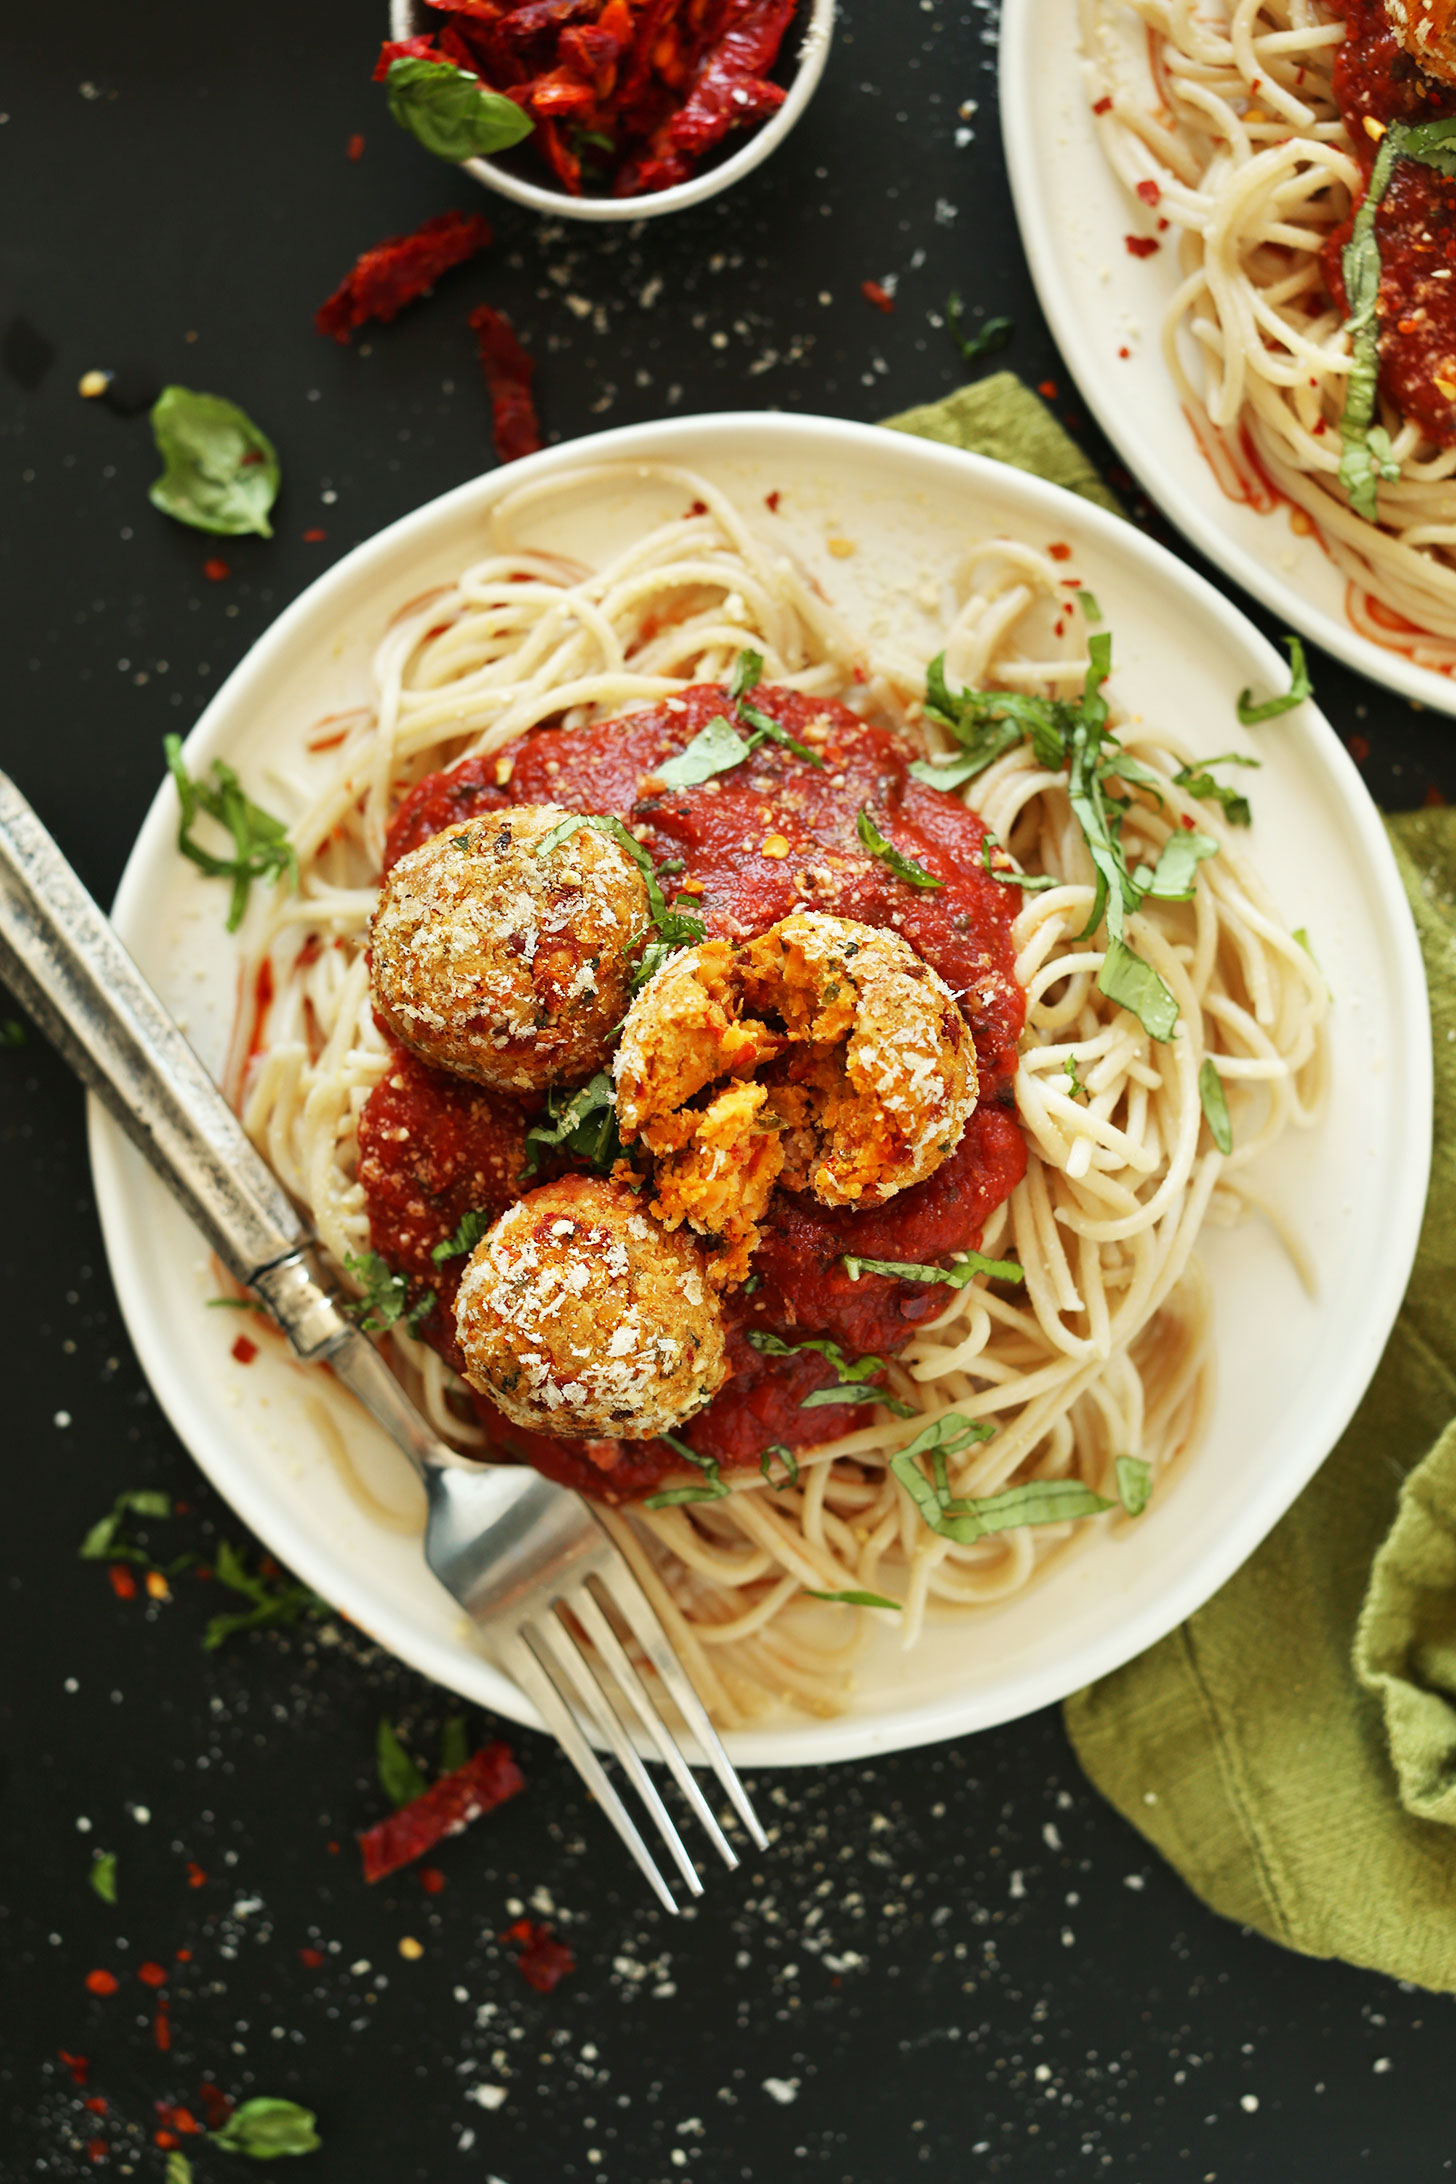 Delicious plant-based meal of spaghetti noodles, marinara, and our simple Vegan Chickpea Meatballs recipe